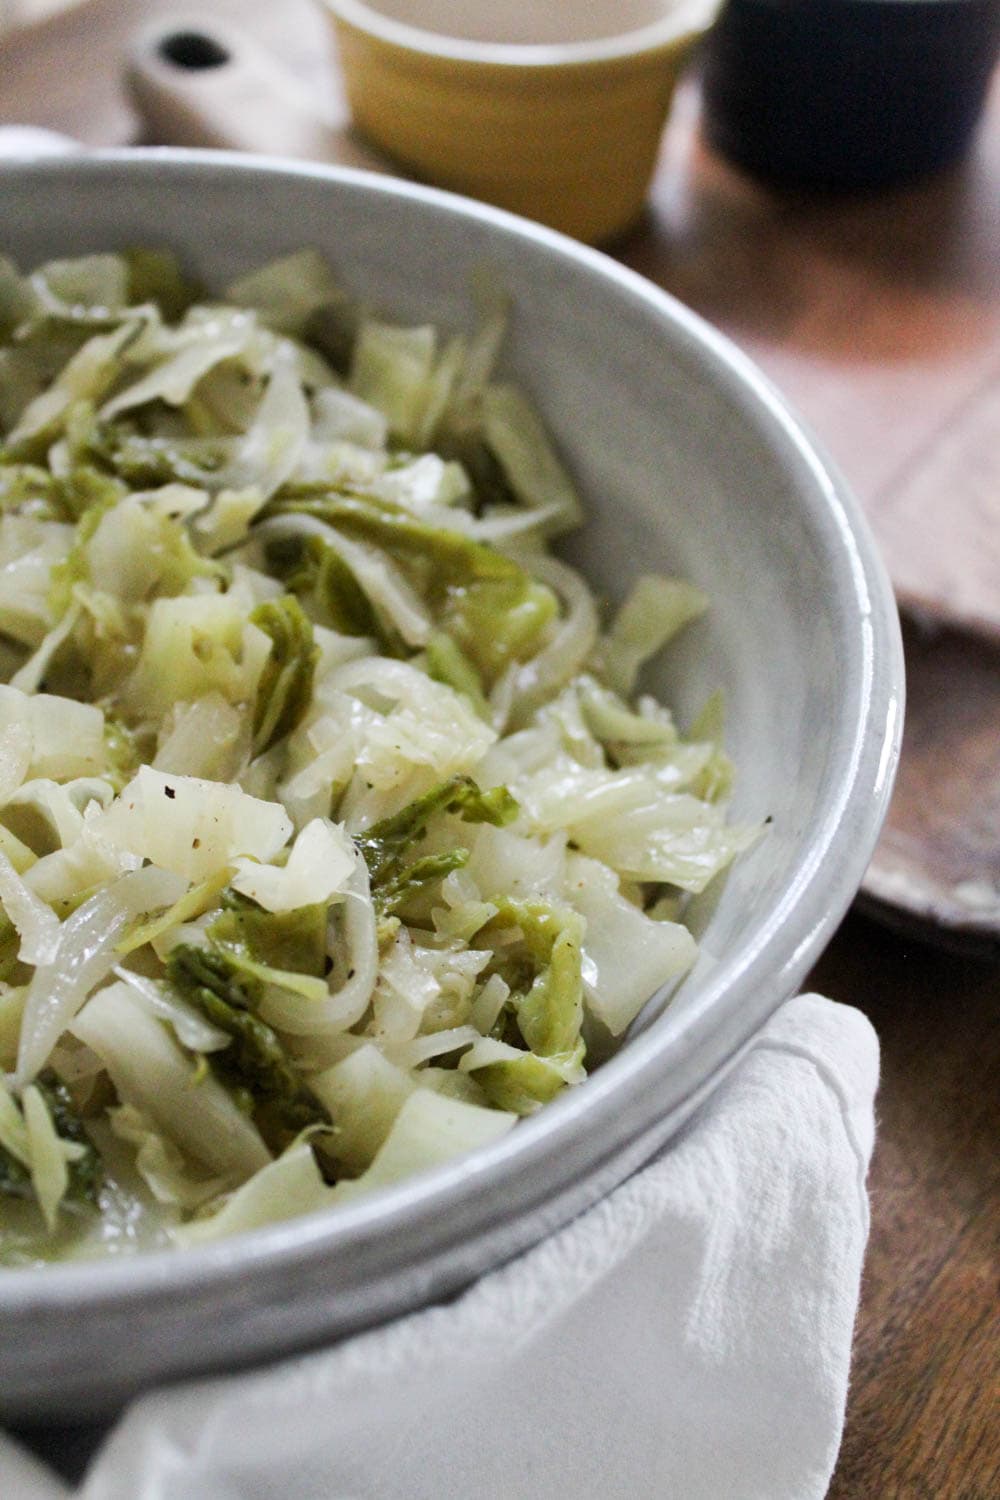 Bowl of buttered cabbage on serving board.